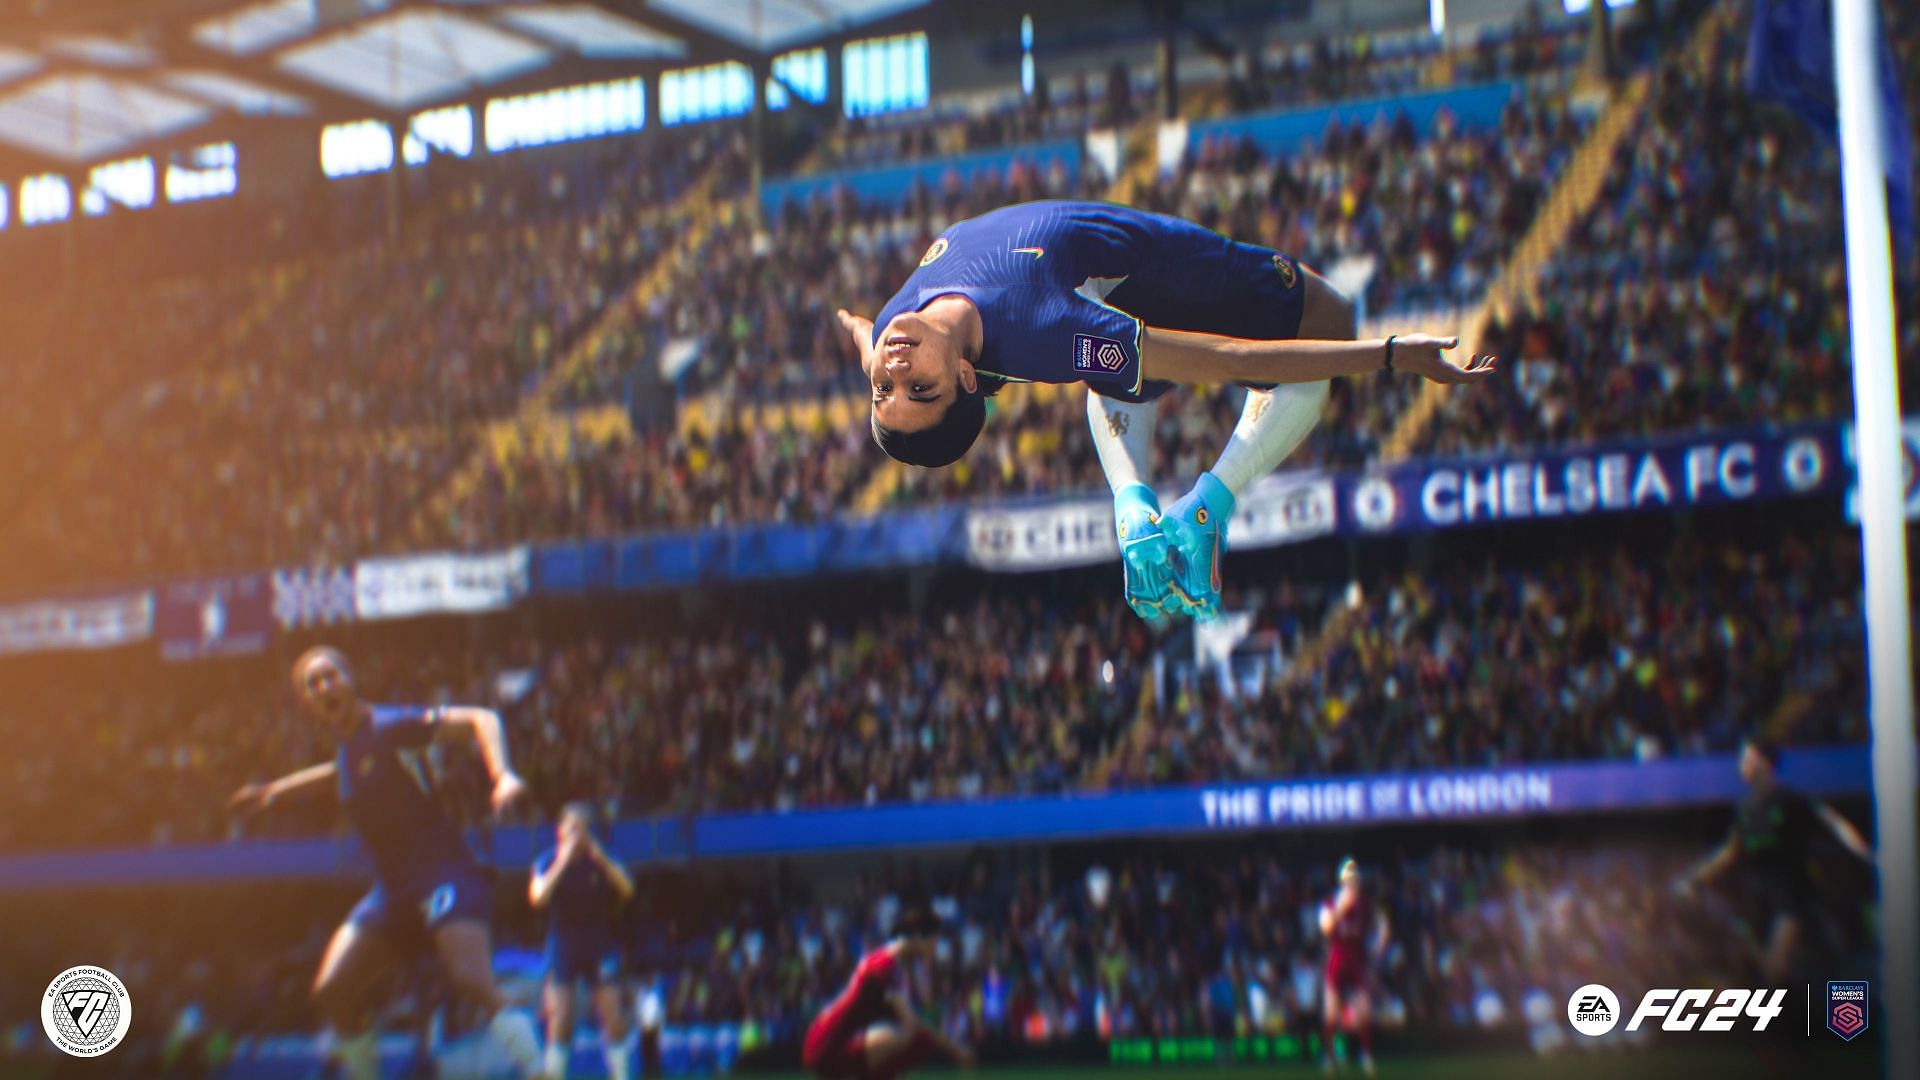 EA FC Mobile: Release date, limited beta, licenses & more - Charlie INTEL